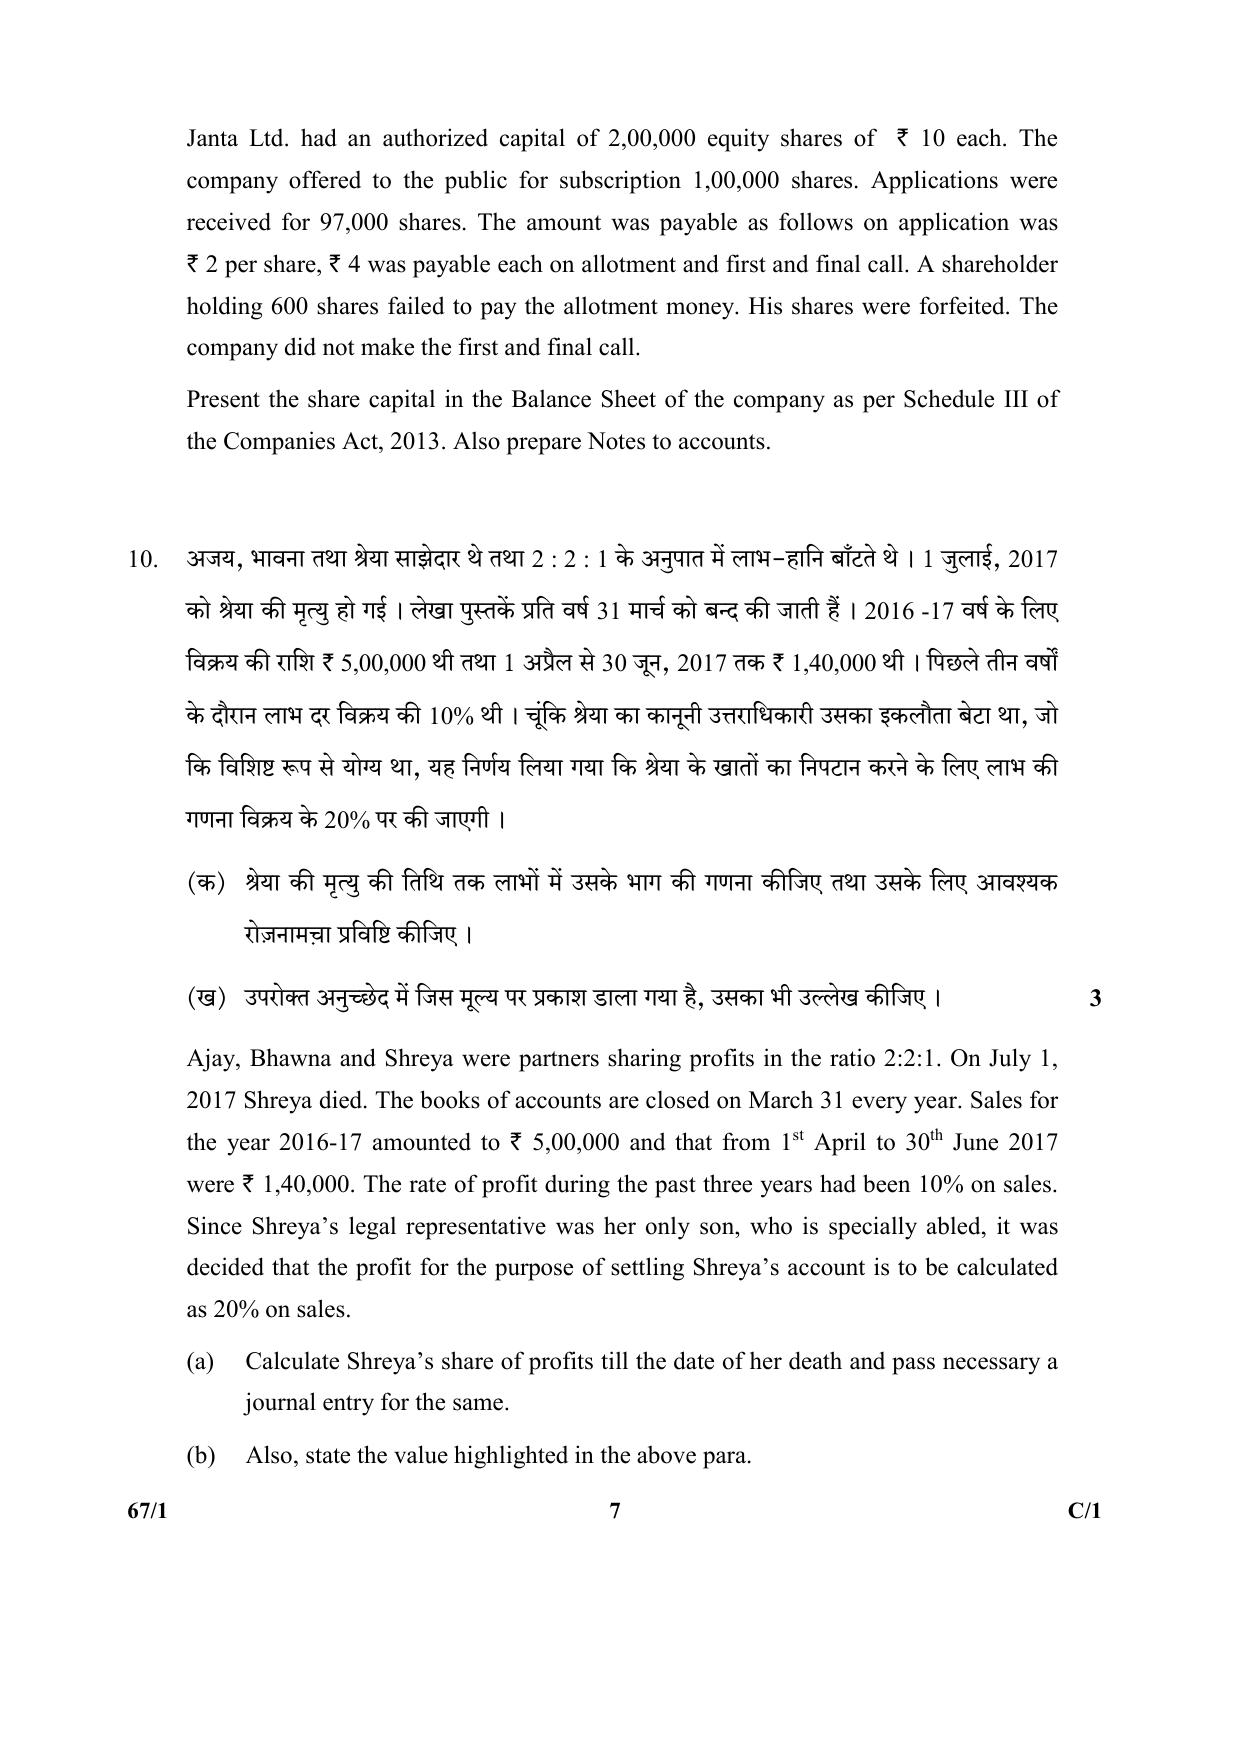 CBSE Class 12 67-1  (Accountancy) 2018 Compartment Question Paper - Page 7